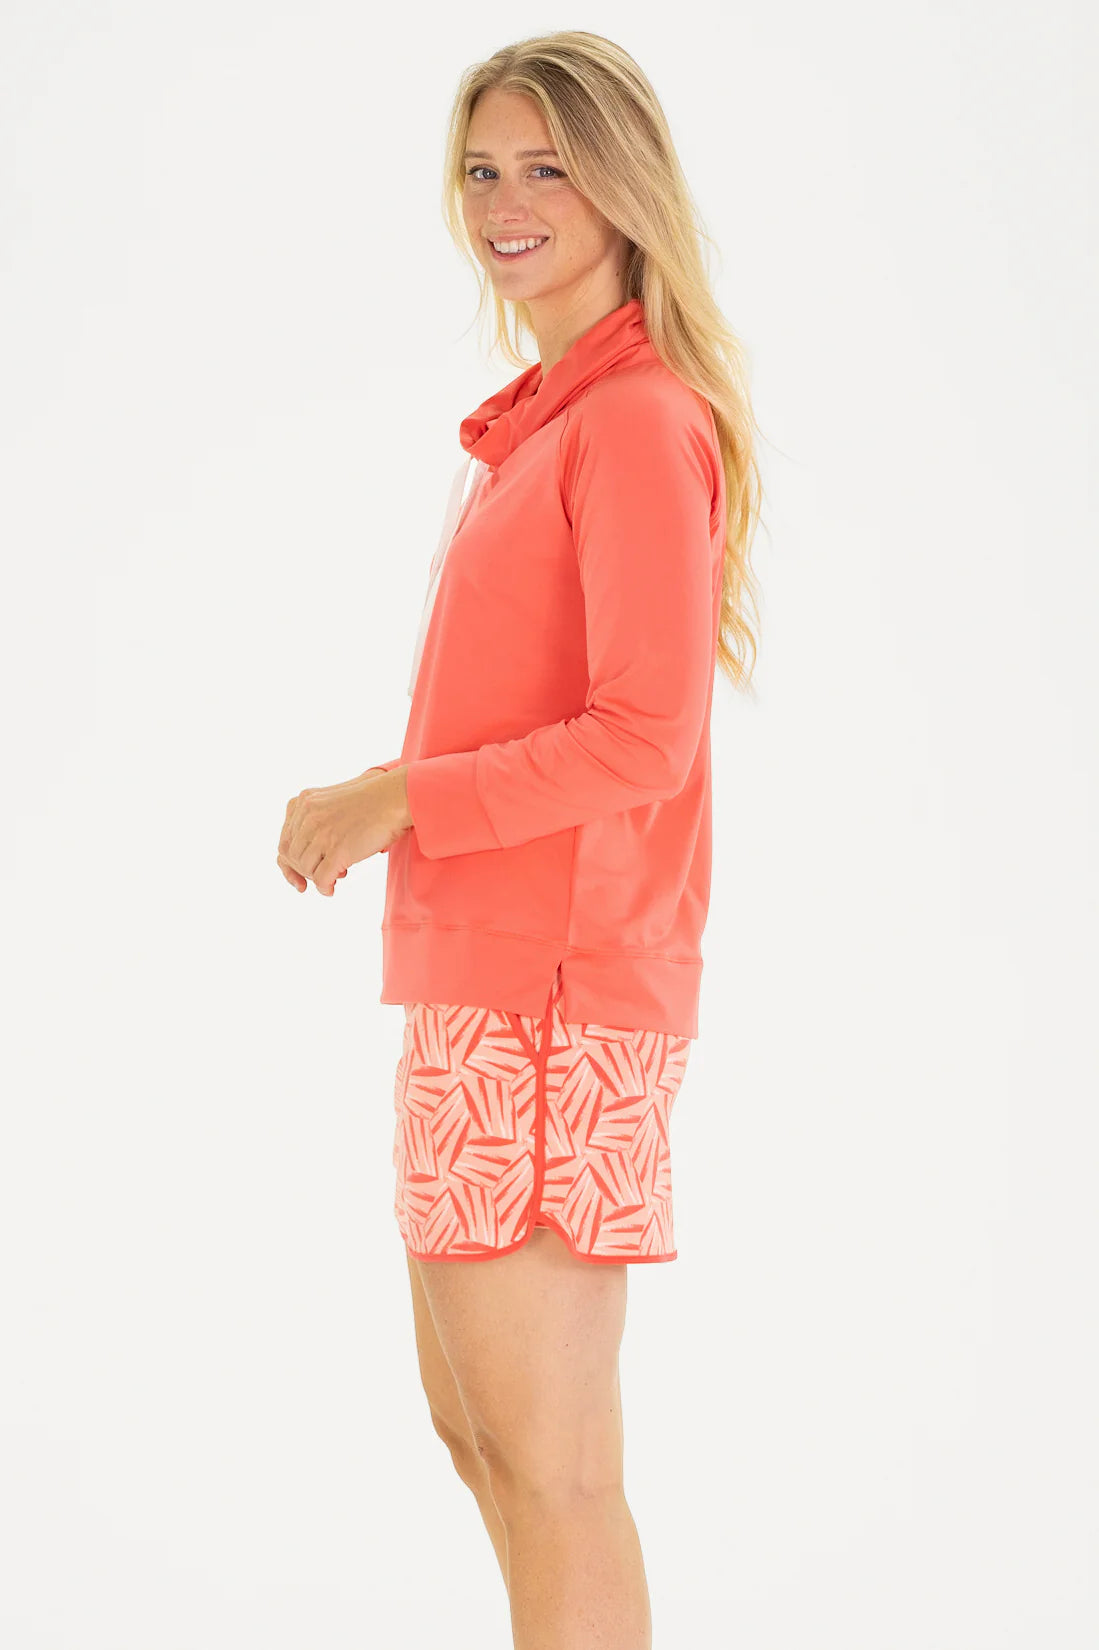 Active Finley Funnel Neck Top in Calypso Coral by Duffield Lane